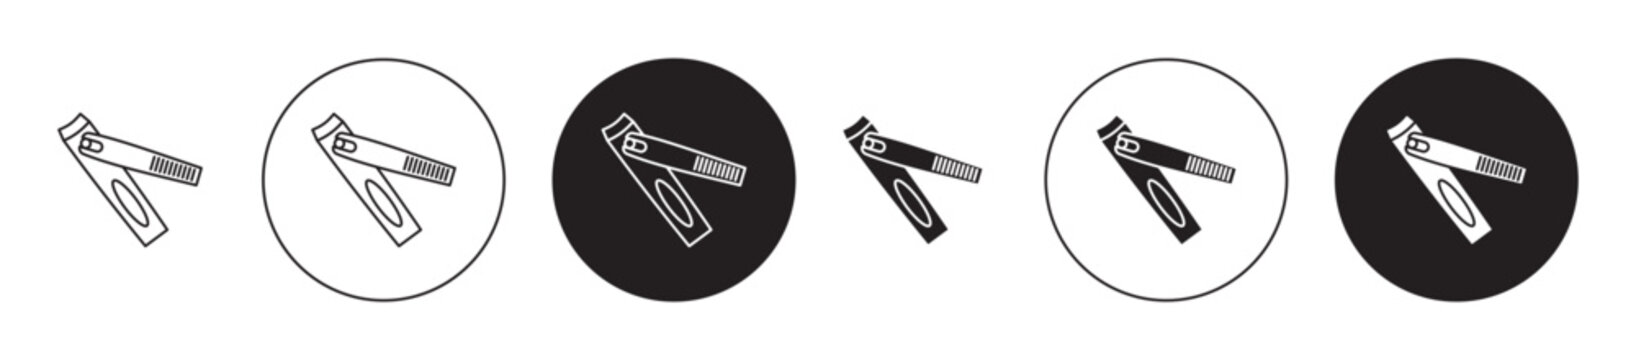 Clippers icon set. nail scissors vector symbol. fingernail cutter sign in black filled and outlined style.